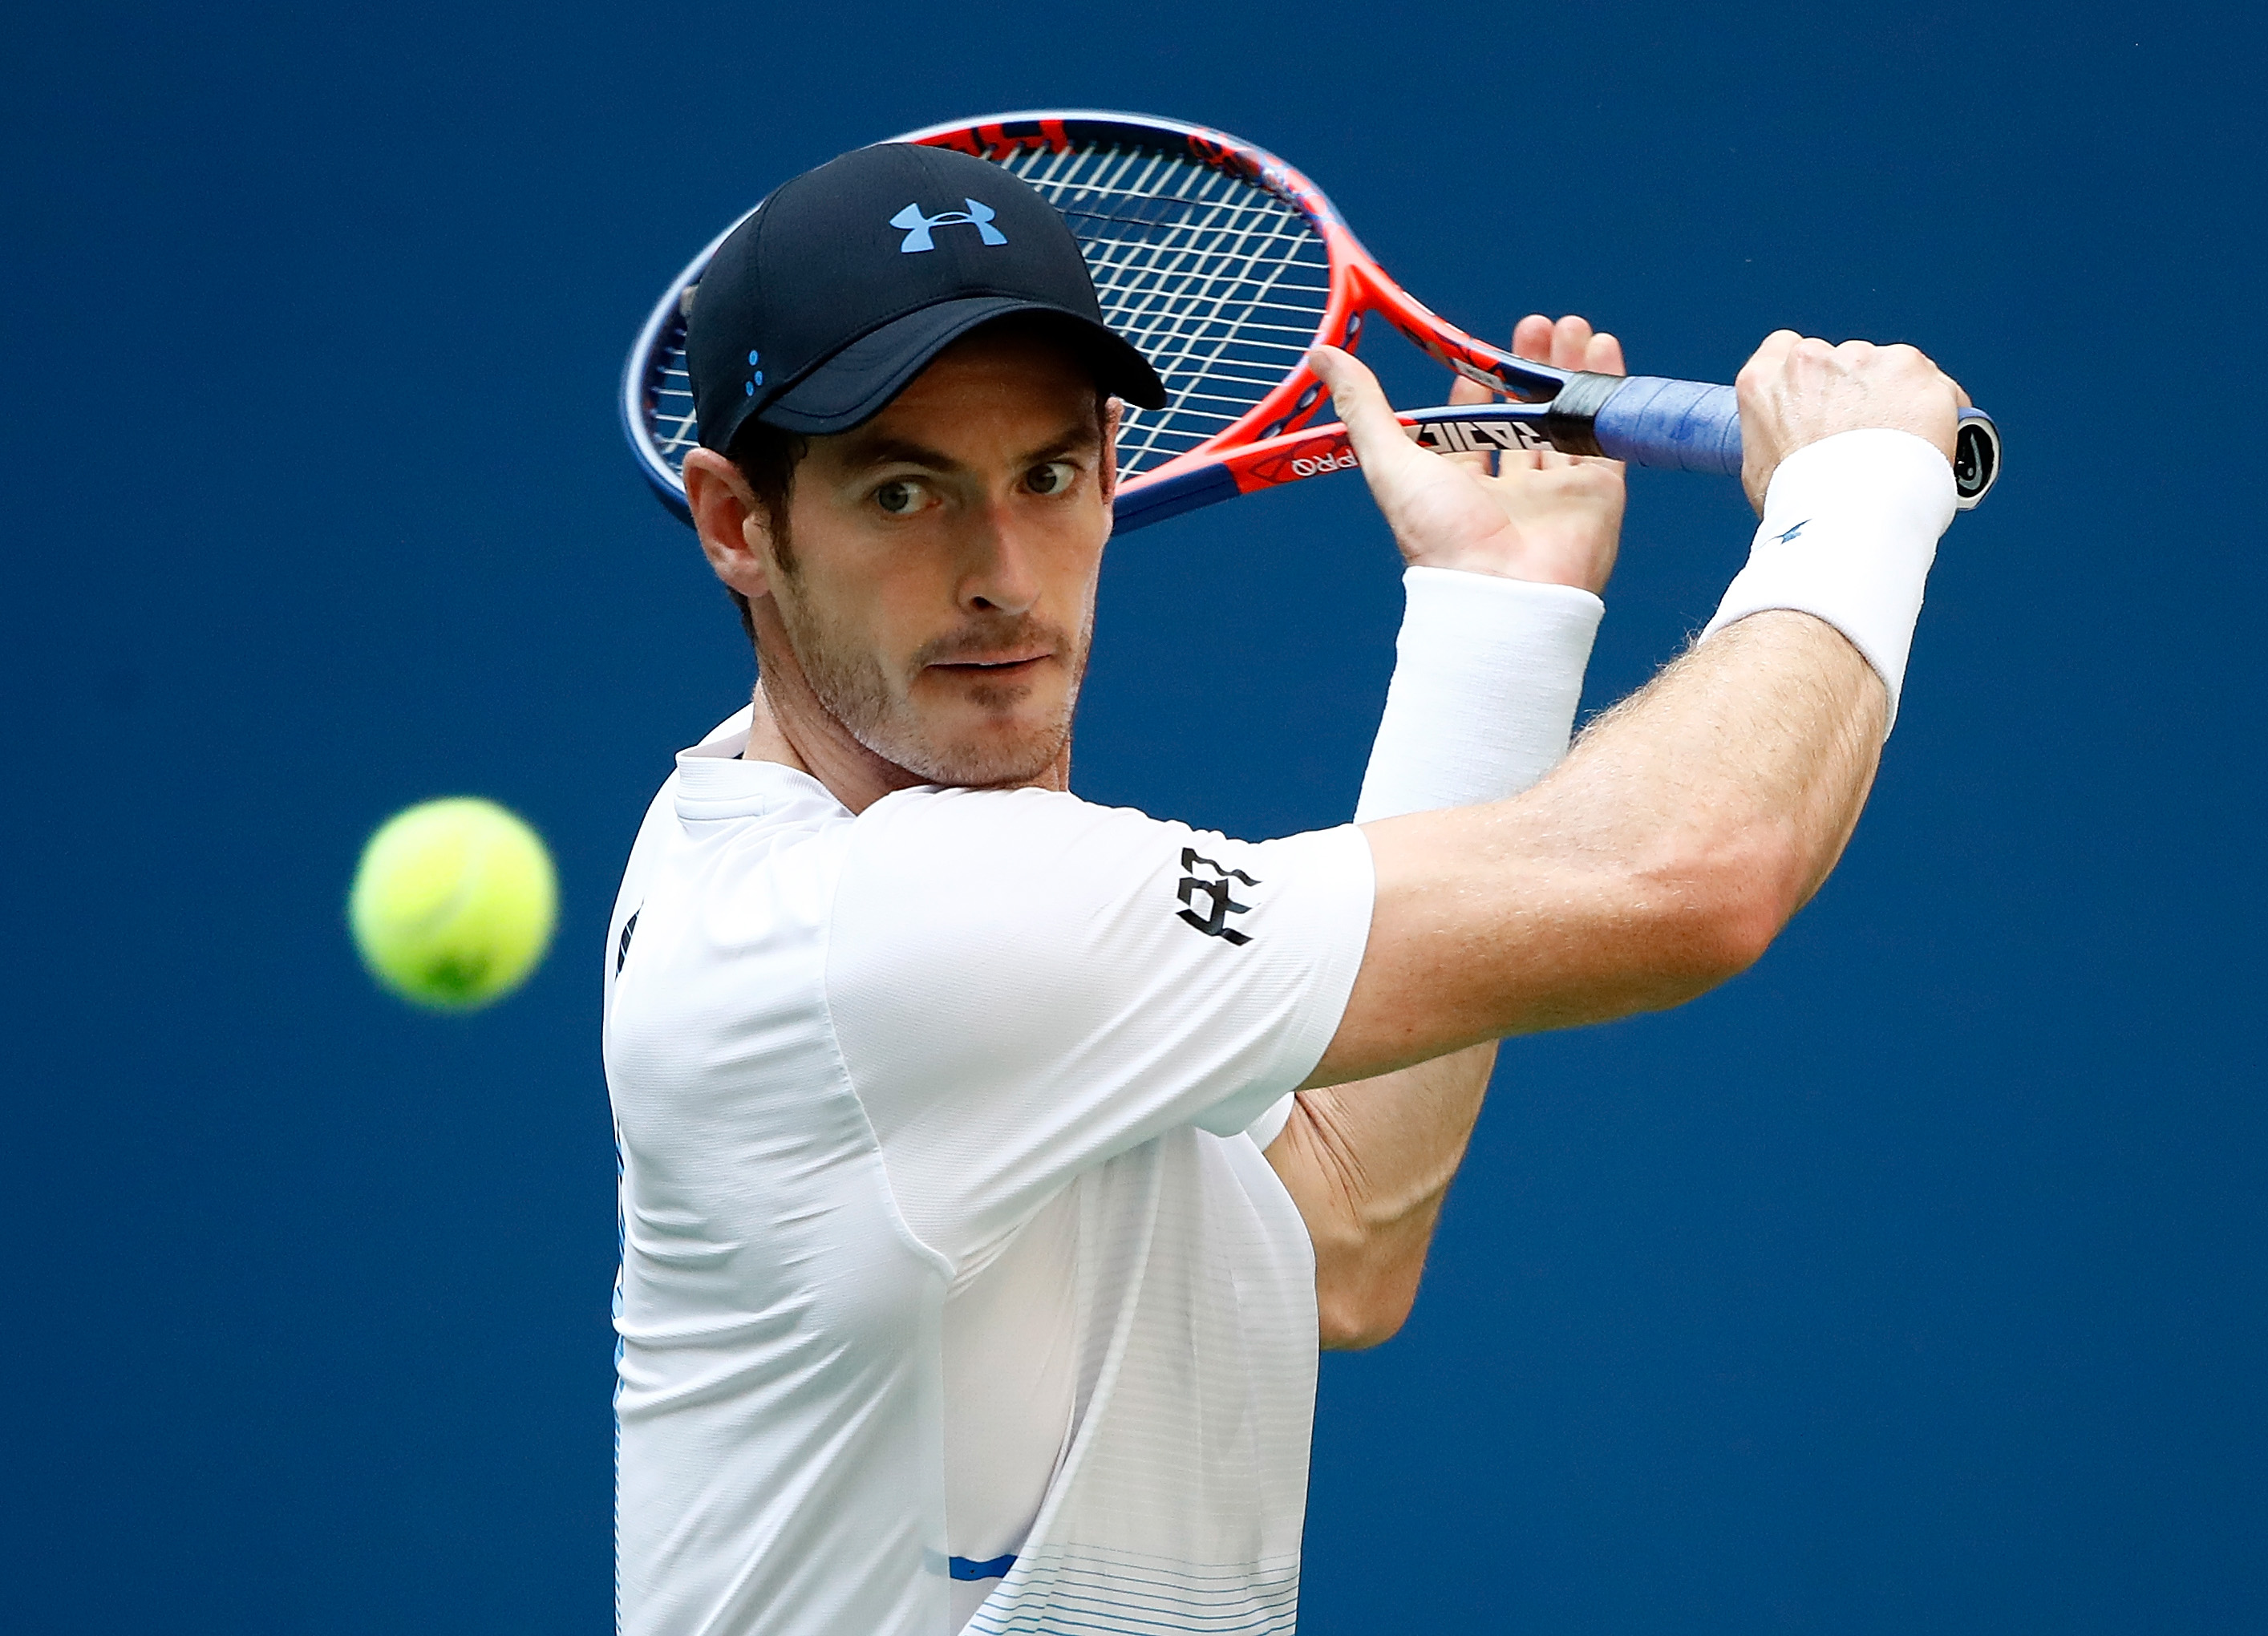 Andy Murray of Great Britain returns the ball during his men's singles second round match against Fernando Verdasco of Spain on Day Three of the 2018 US Open at the USTA Billie Jean King National Tennis Center on August 29, 2018 in the Flushing neighborhood of the Queens borough of New York City.  (Photo by Julian Finney/Getty Images) (Julian Finney&mdash;Getty Images)